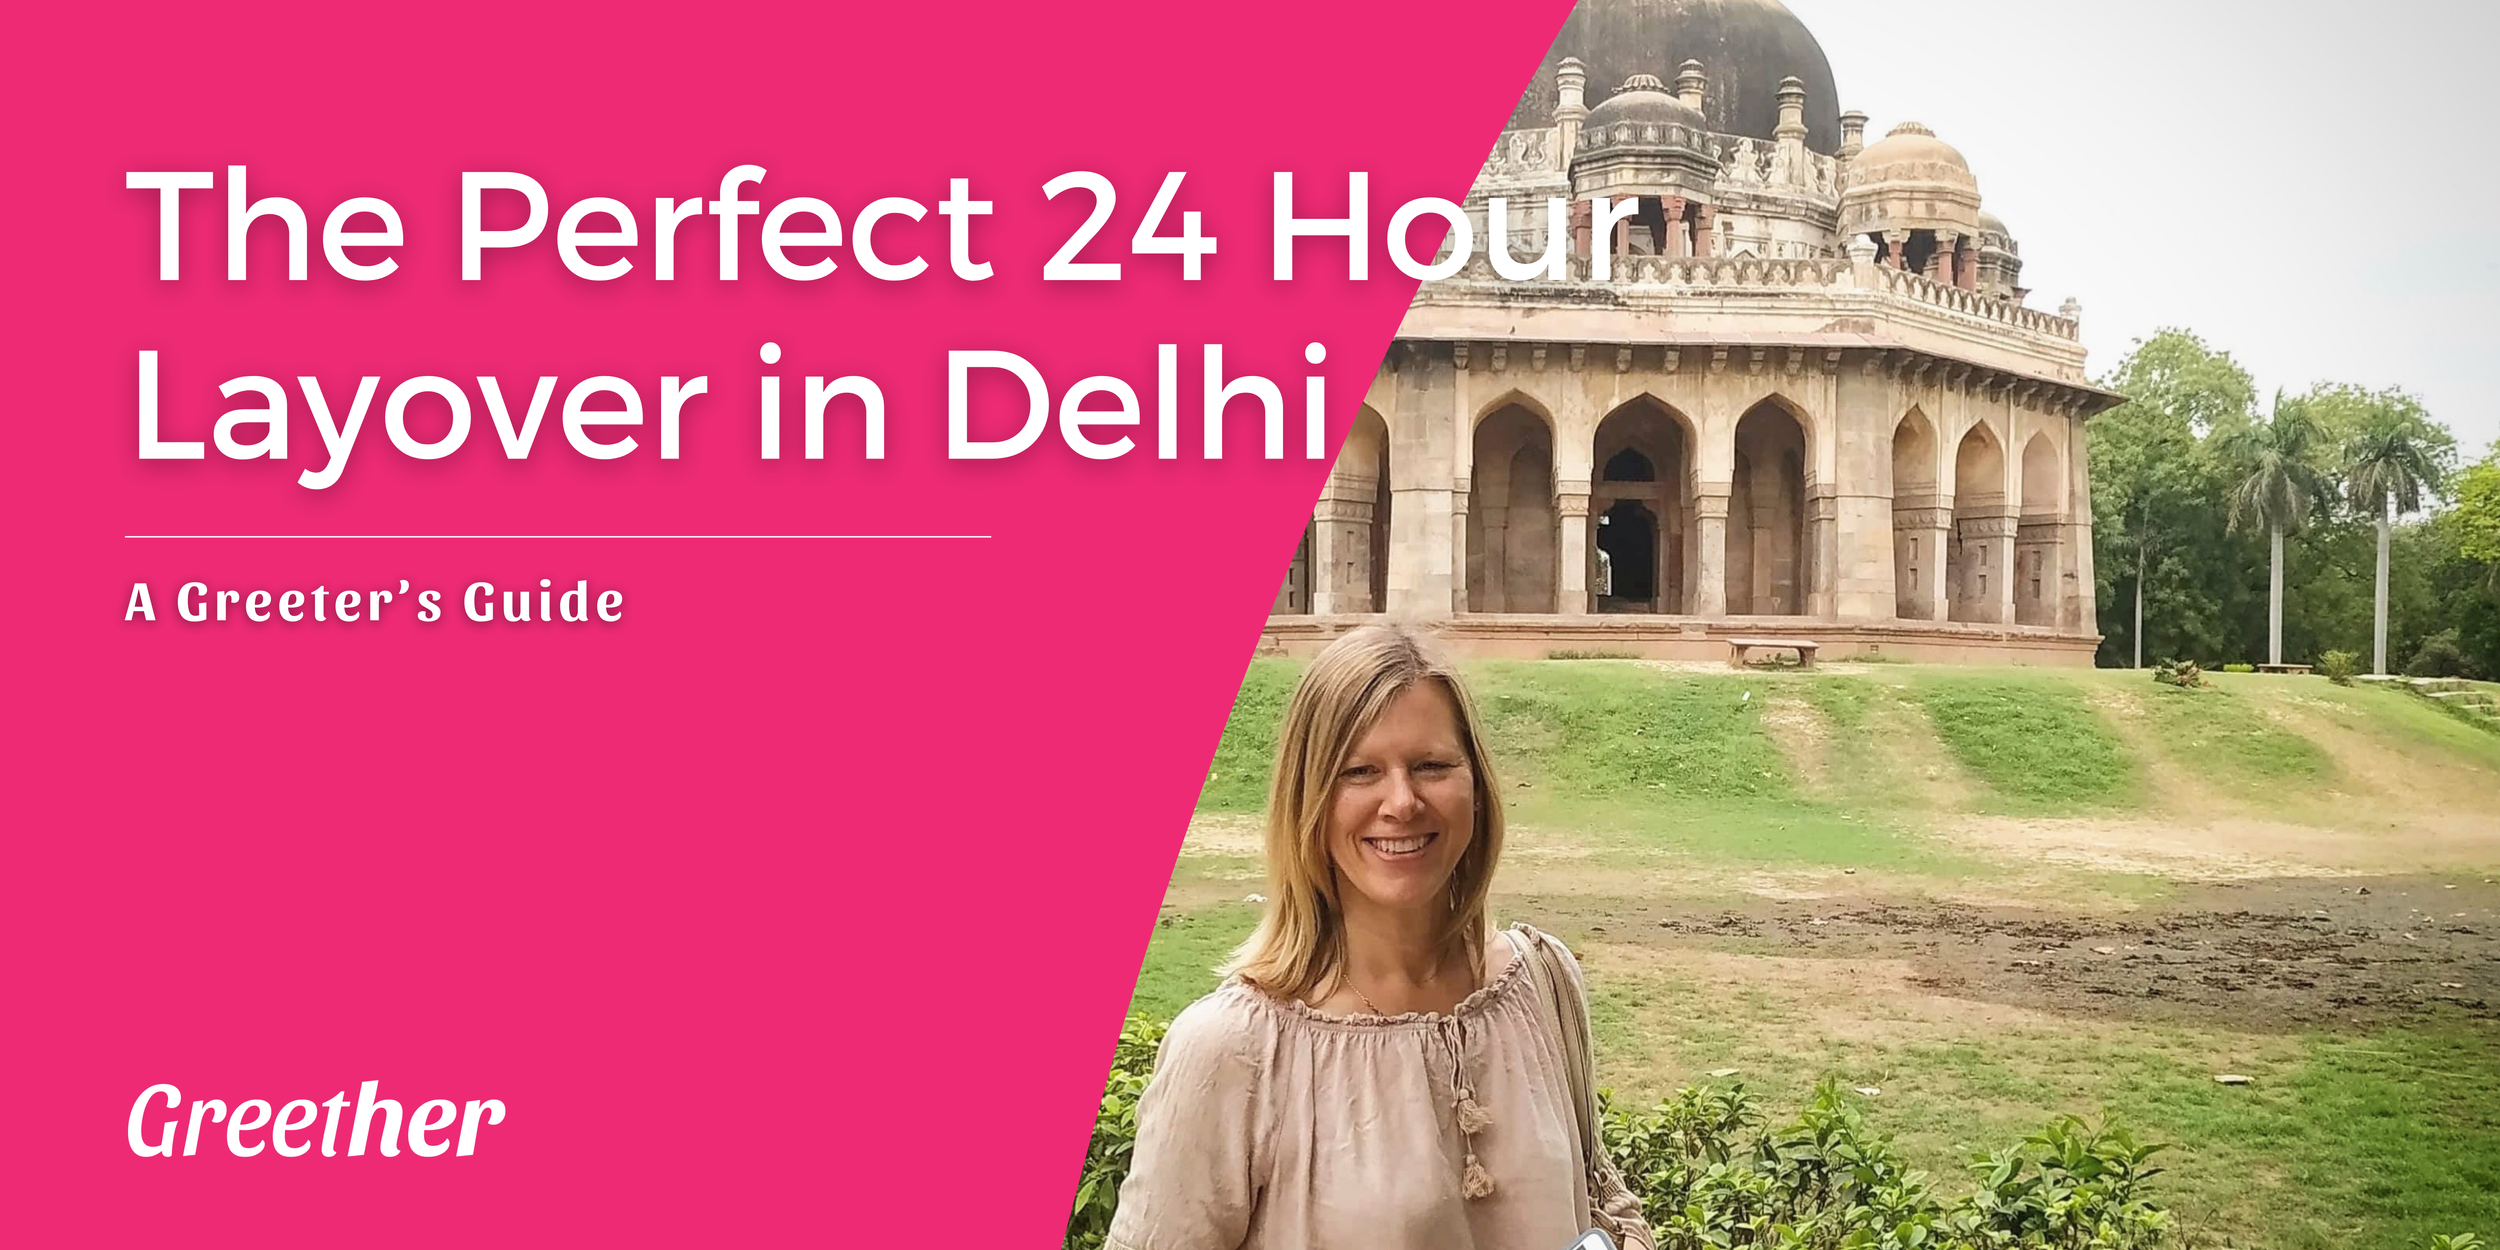 The Perfect 24 Hour Layover in Delhi – A Greeter’s Guide